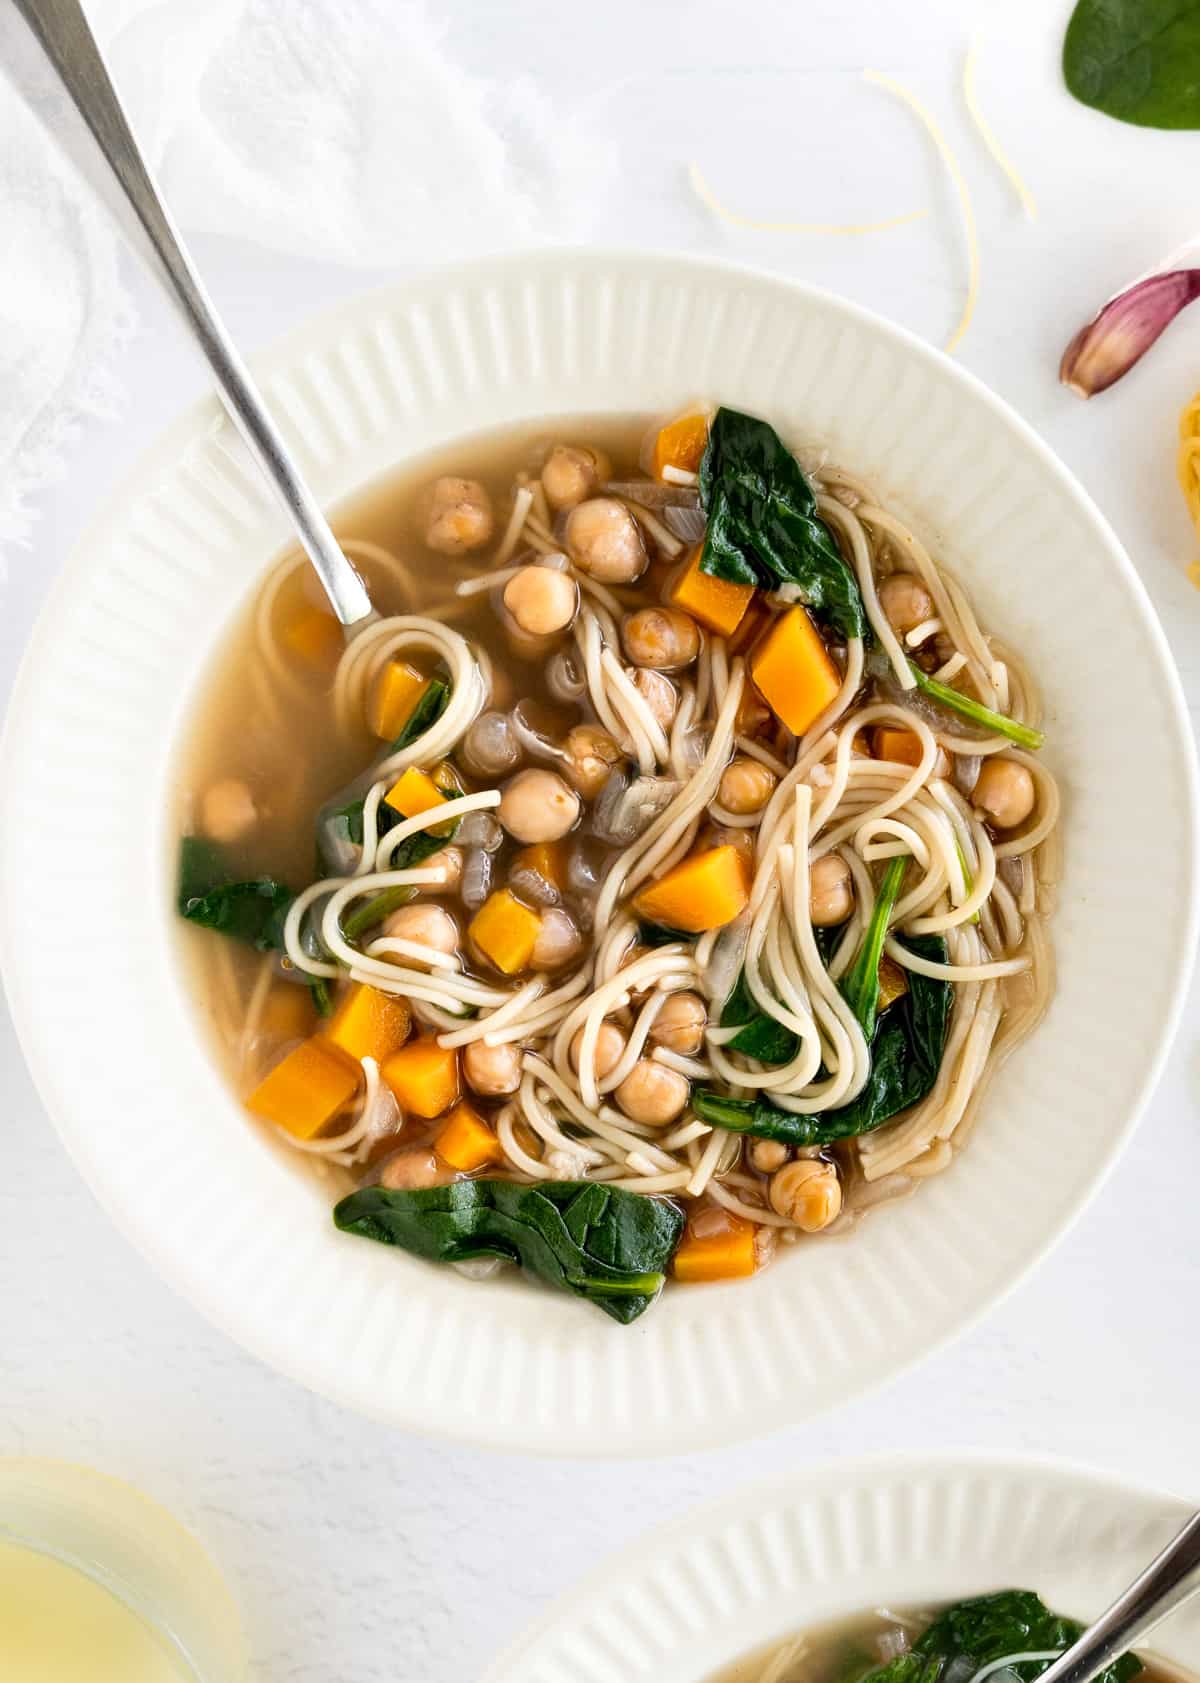 A white bowl filled with vermicelli noodles, chickpeas, spinach and diced carrot soup